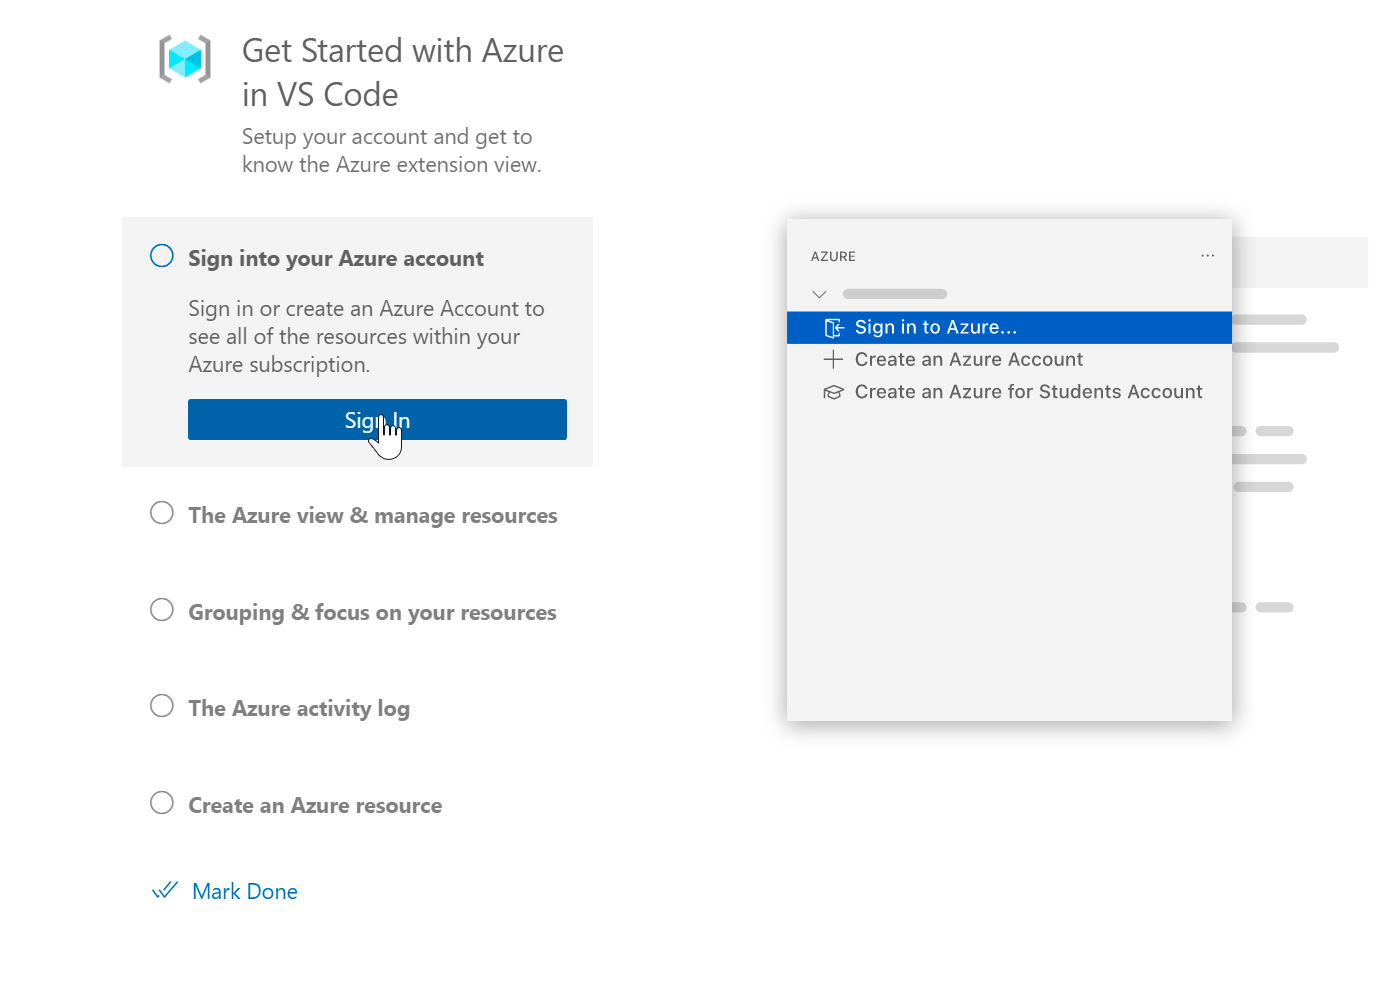 Signing into Azure with VS Code